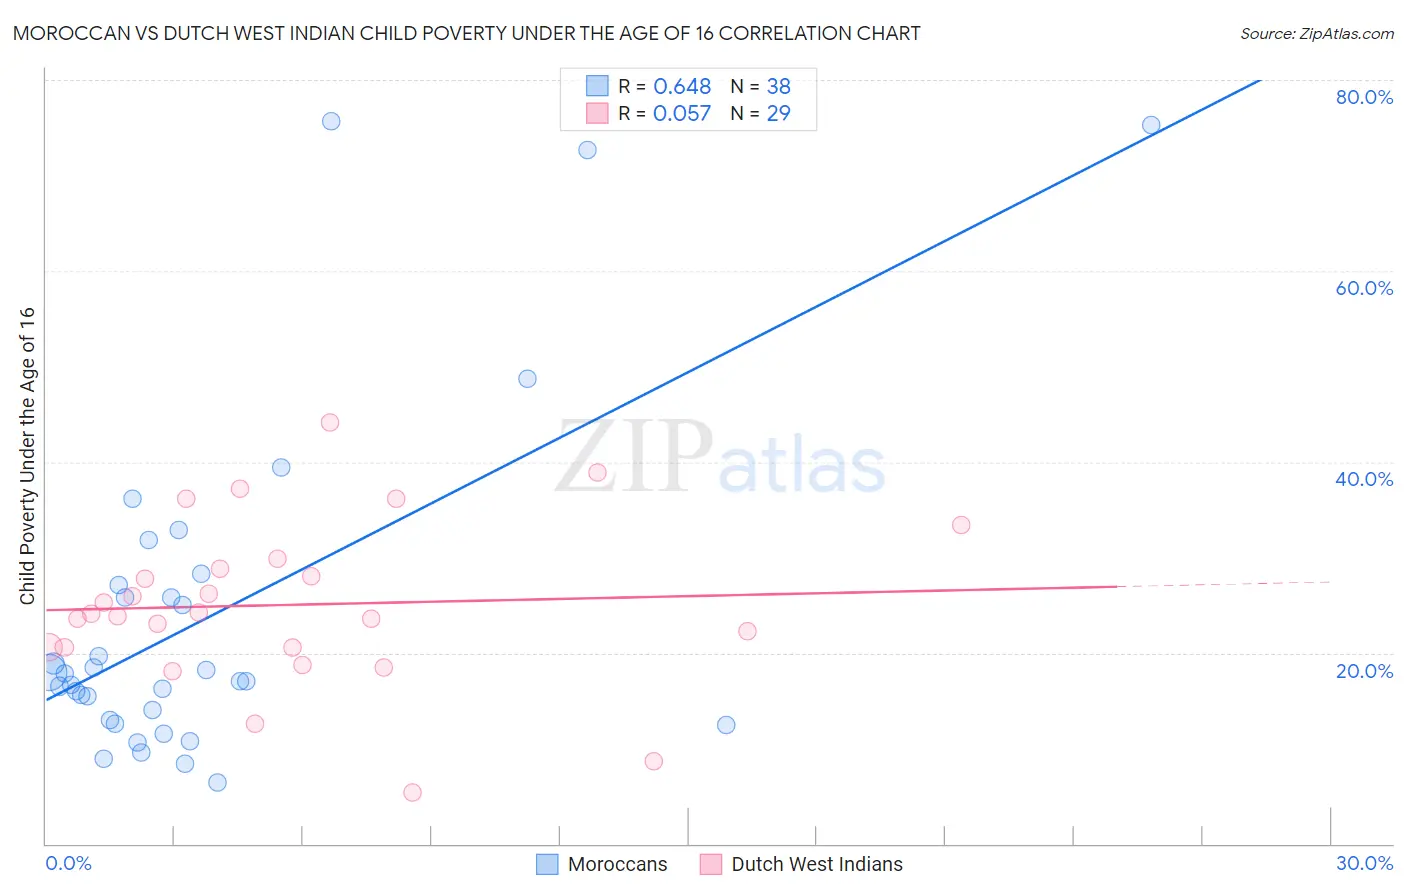 Moroccan vs Dutch West Indian Child Poverty Under the Age of 16